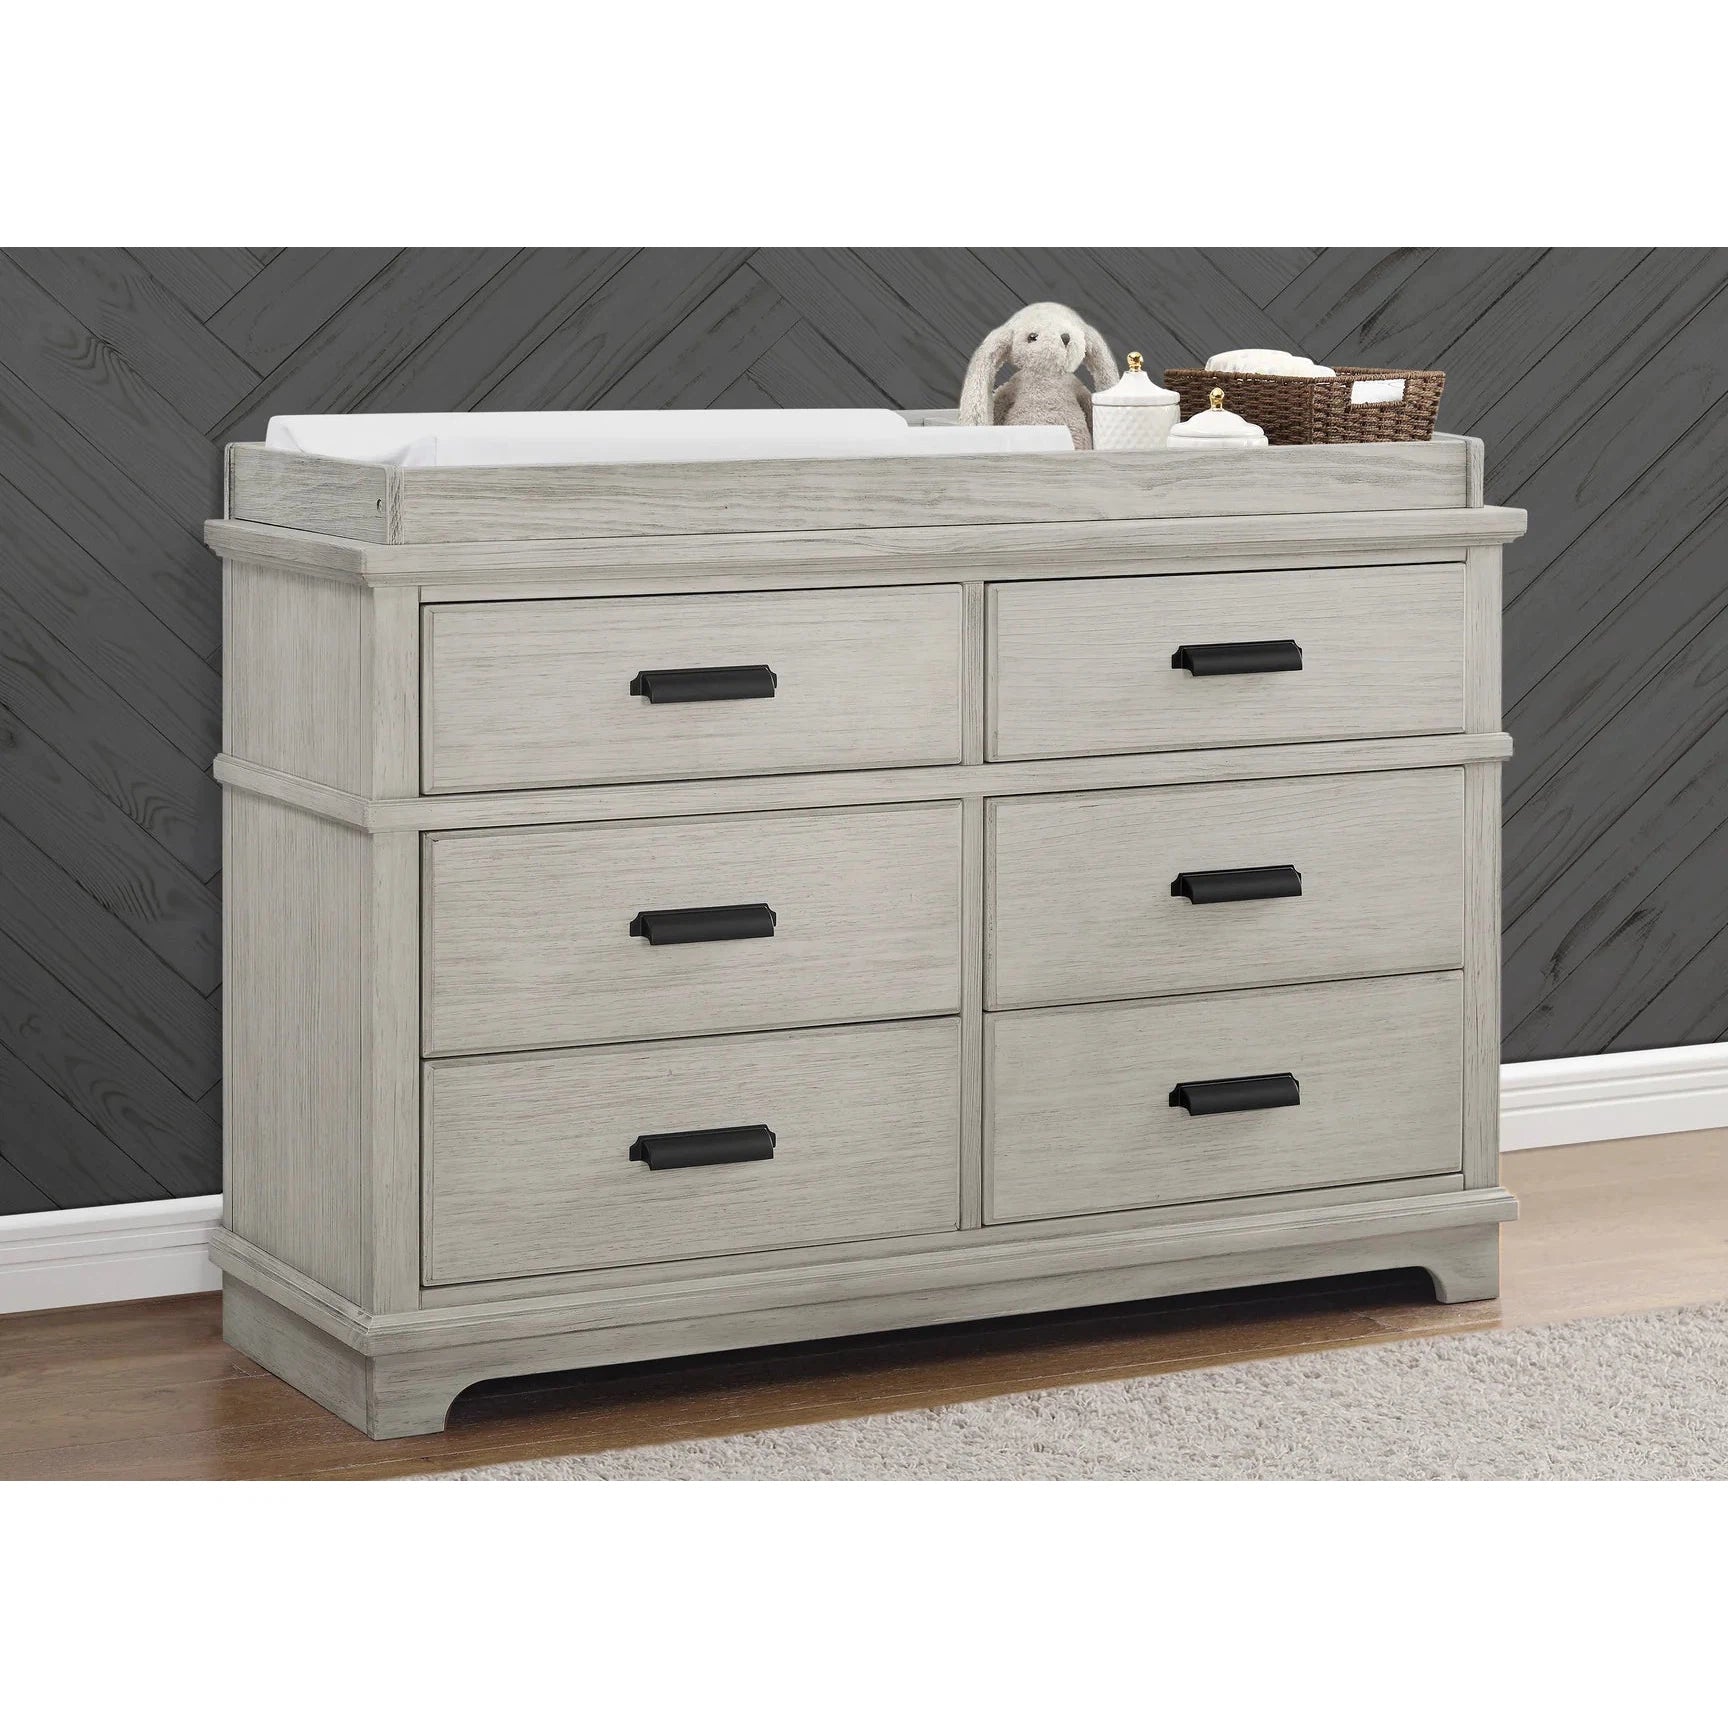 Simmons Kids Asher 6 Drawer Dresser with Change Top Tray - Rustic Mist-DELTA-Little Giant Kidz